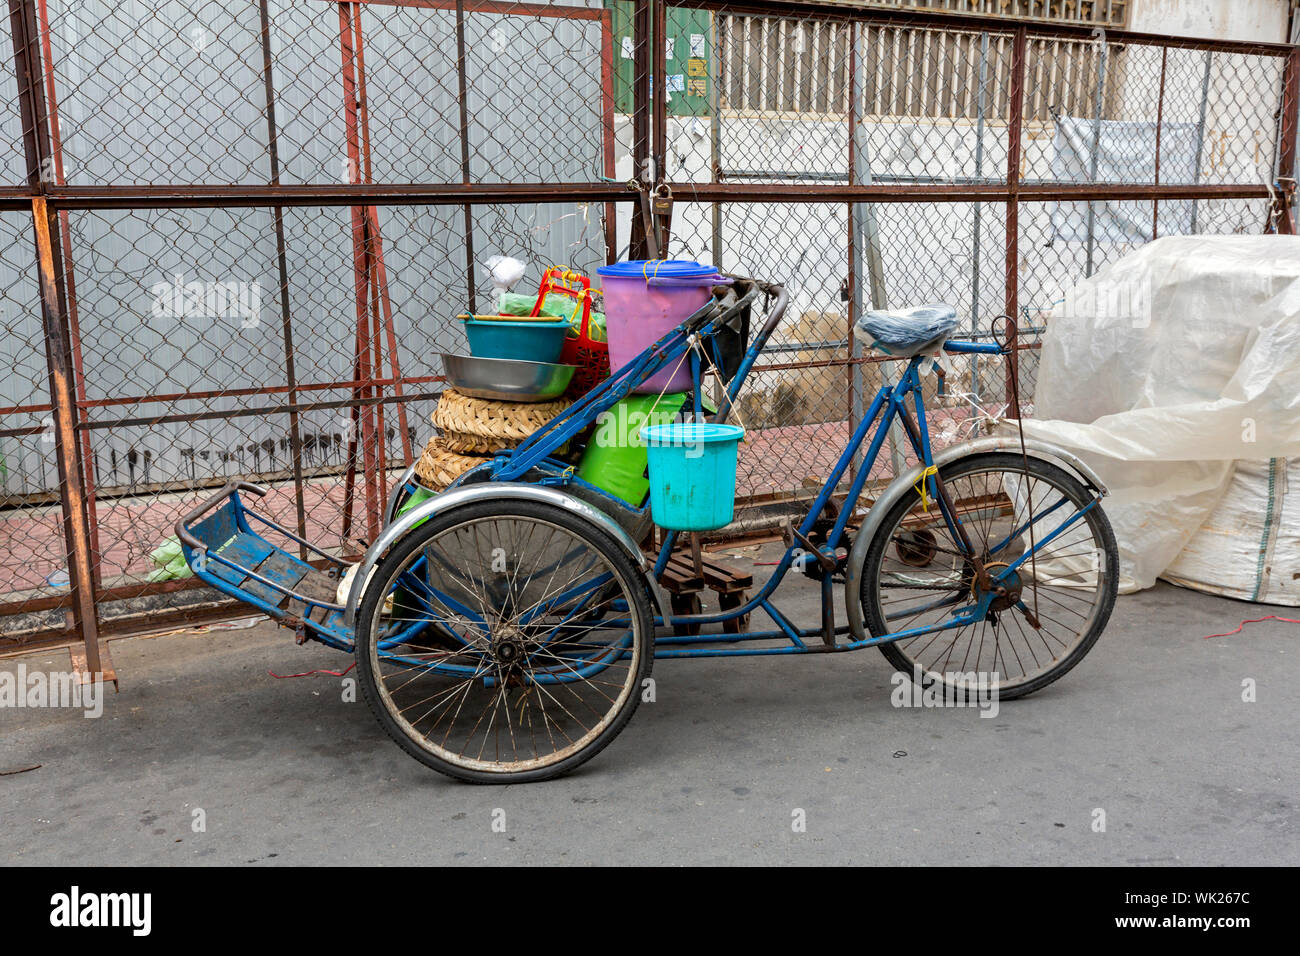 A cyclo loaded with food delivery utensils is parked on a city street while the driver makes a food delivery in urban Phnom Penh, Cambodia. Stock Photo